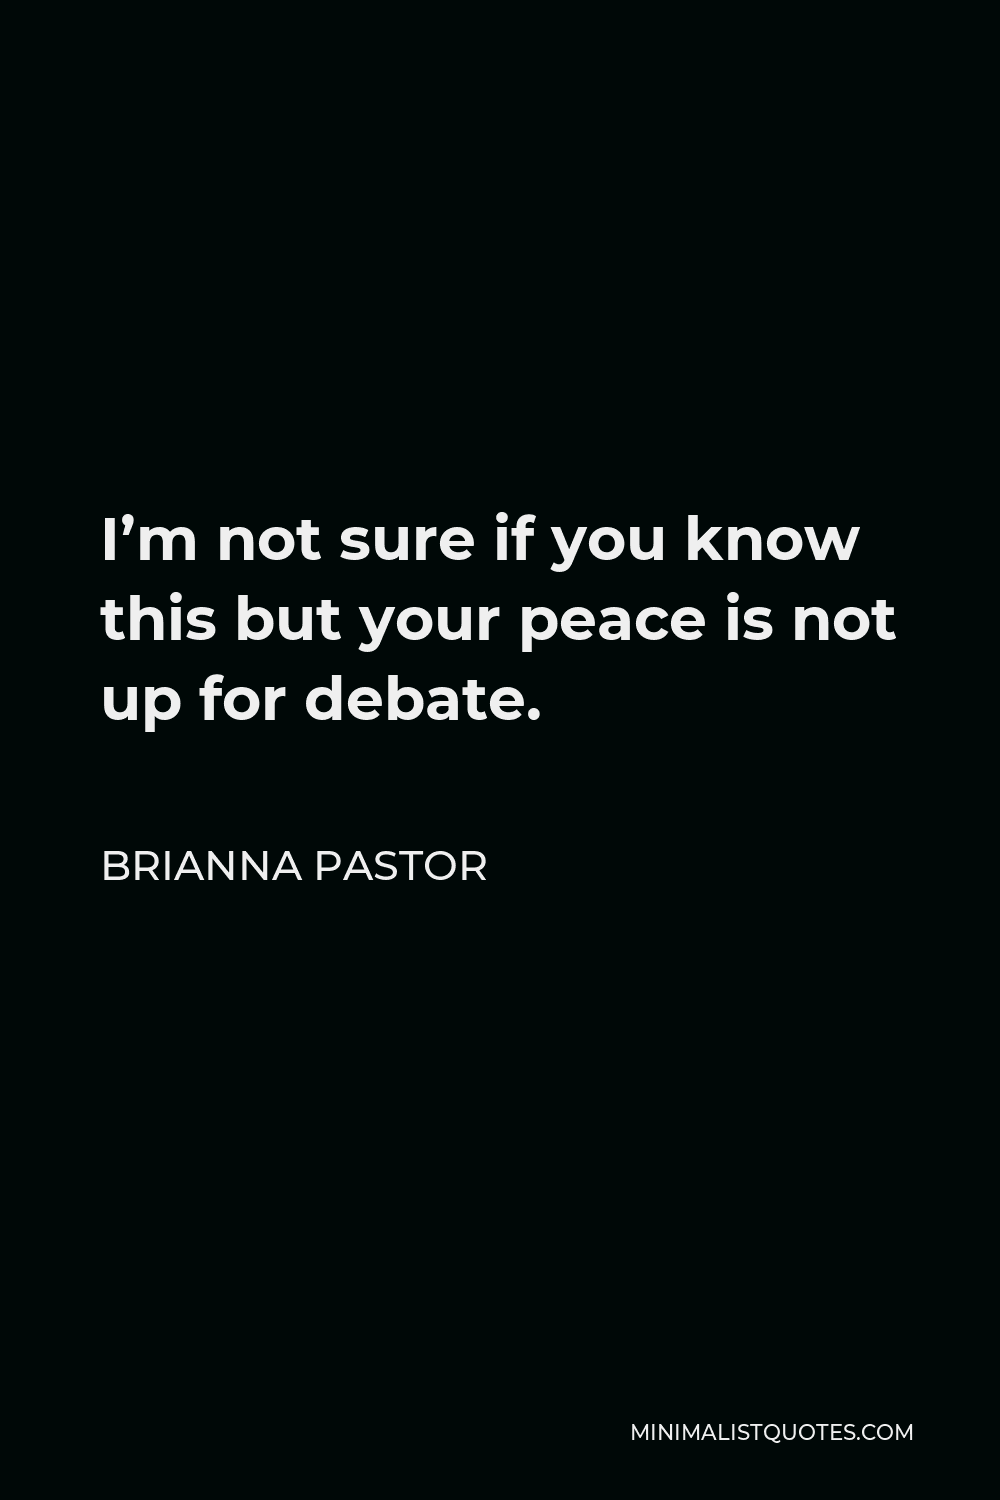 Brianna Pastor Quote - I’m not sure if you know this but your peace is not up for debate.